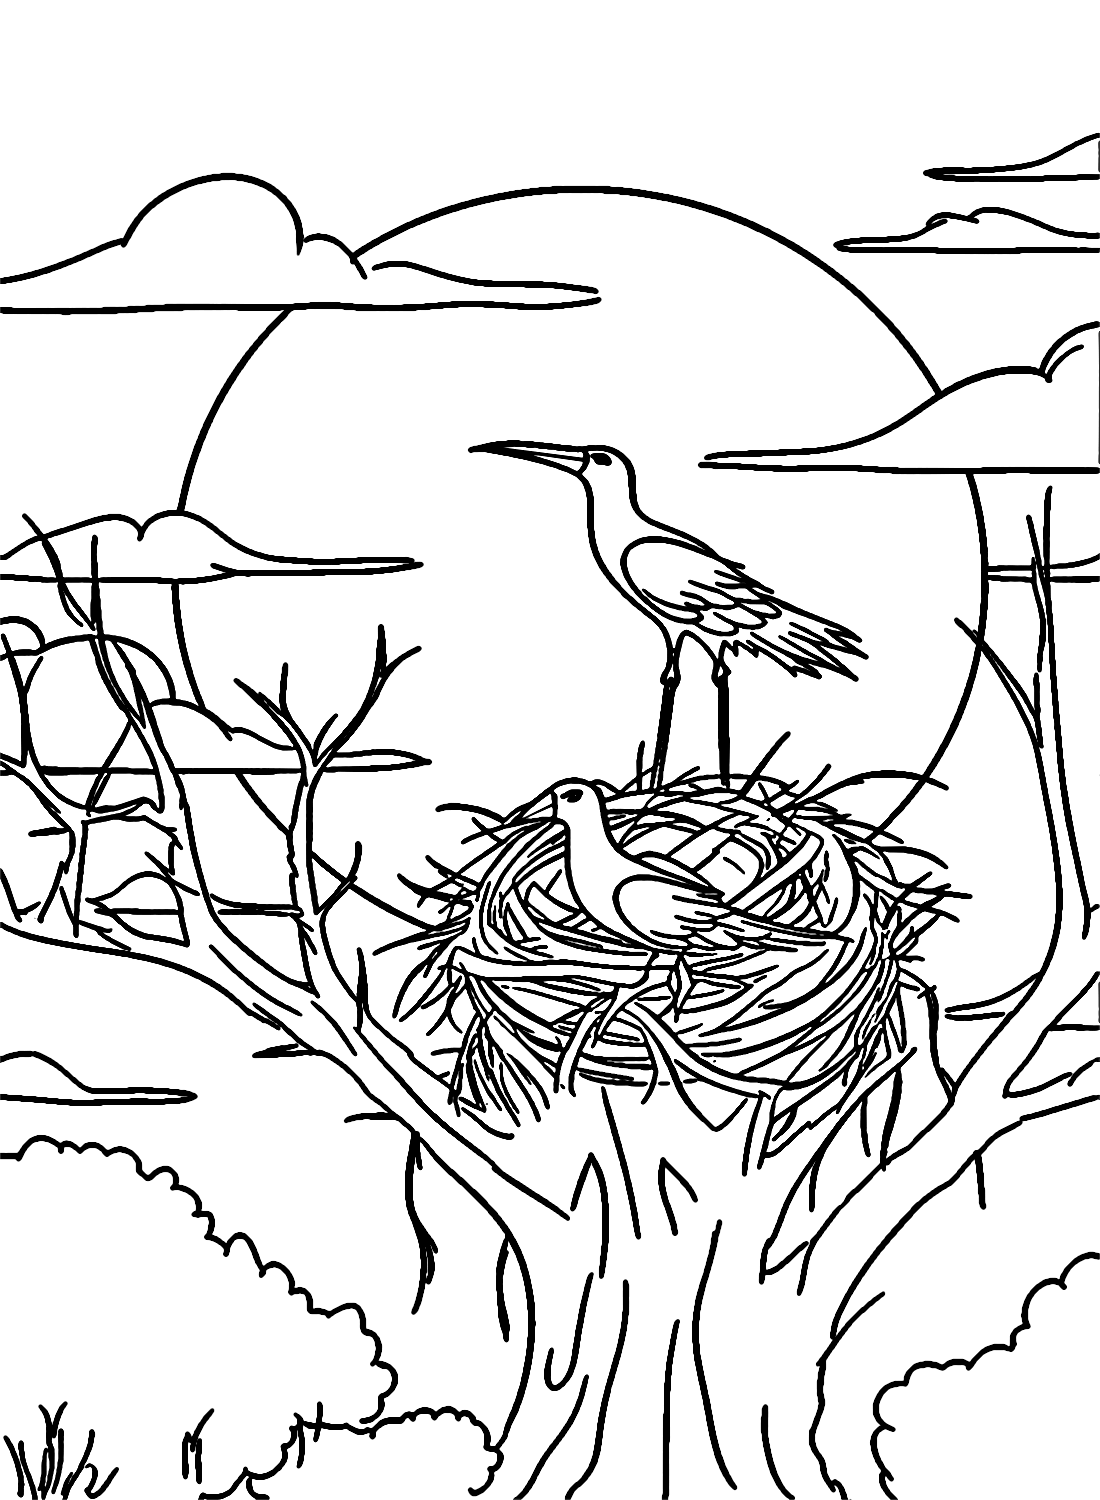 Storks nest on top of a Tall Tree from Stork